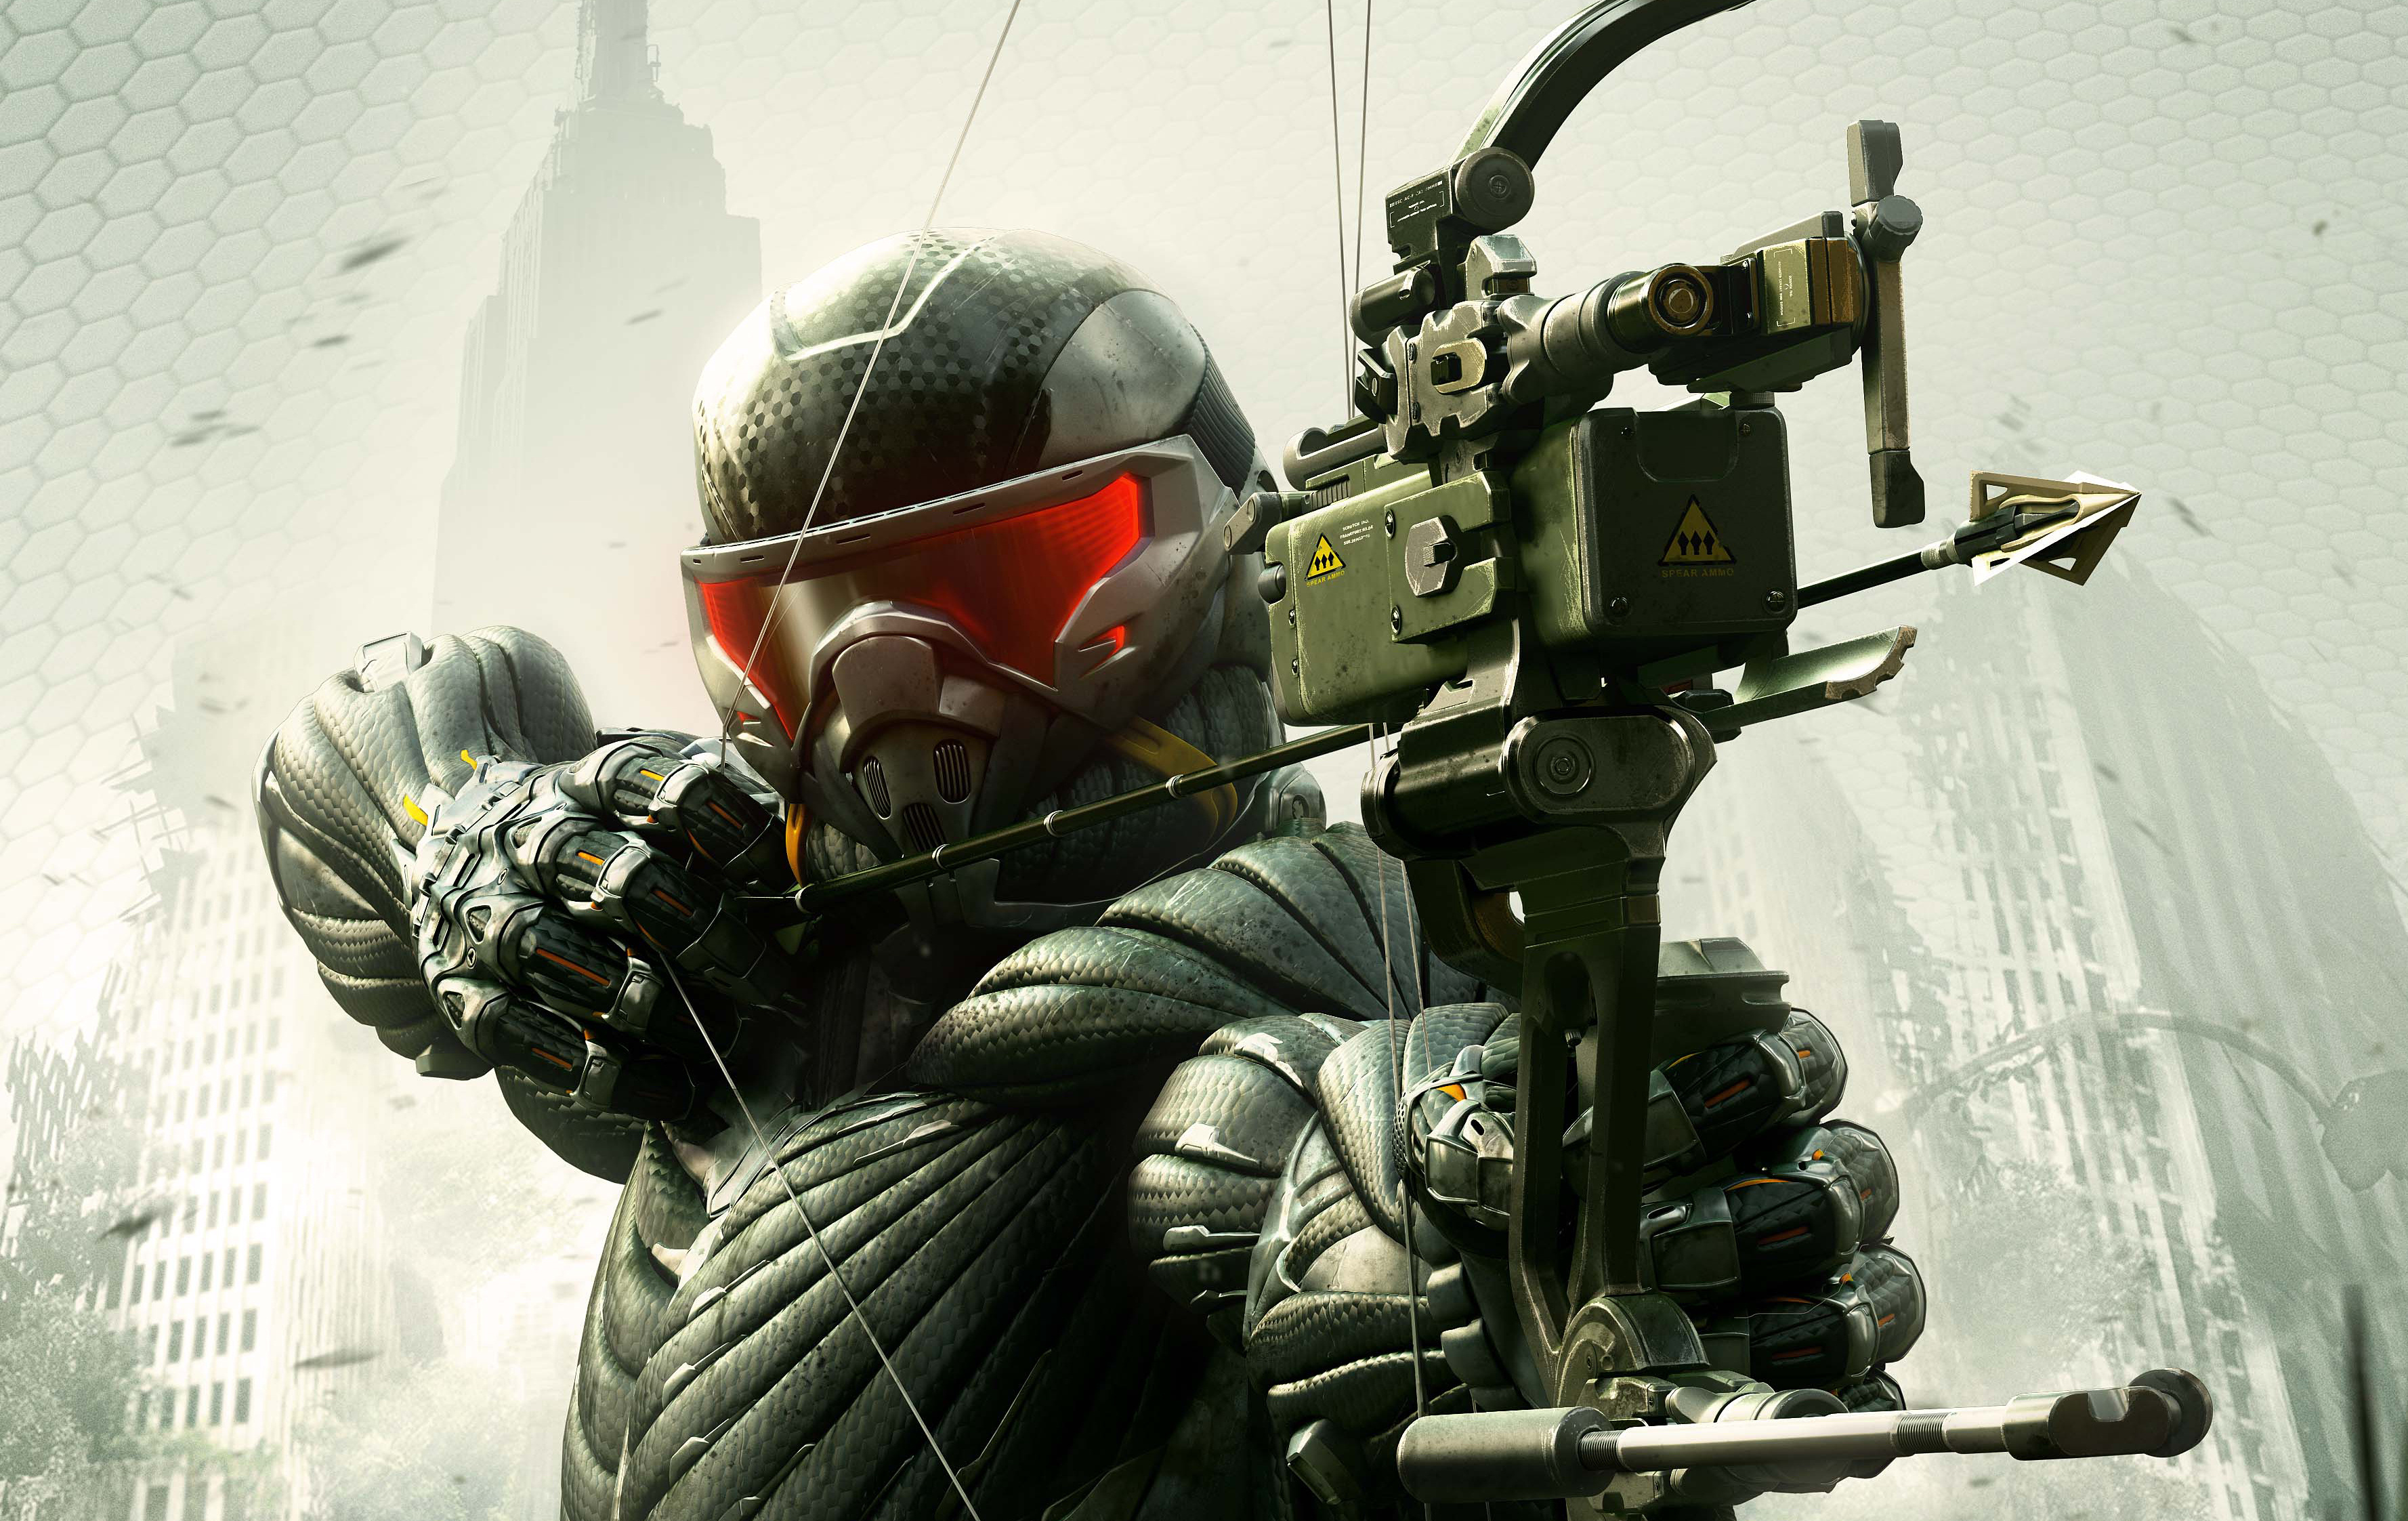 Video Game Crysis 3 HD Wallpaper | Background Image